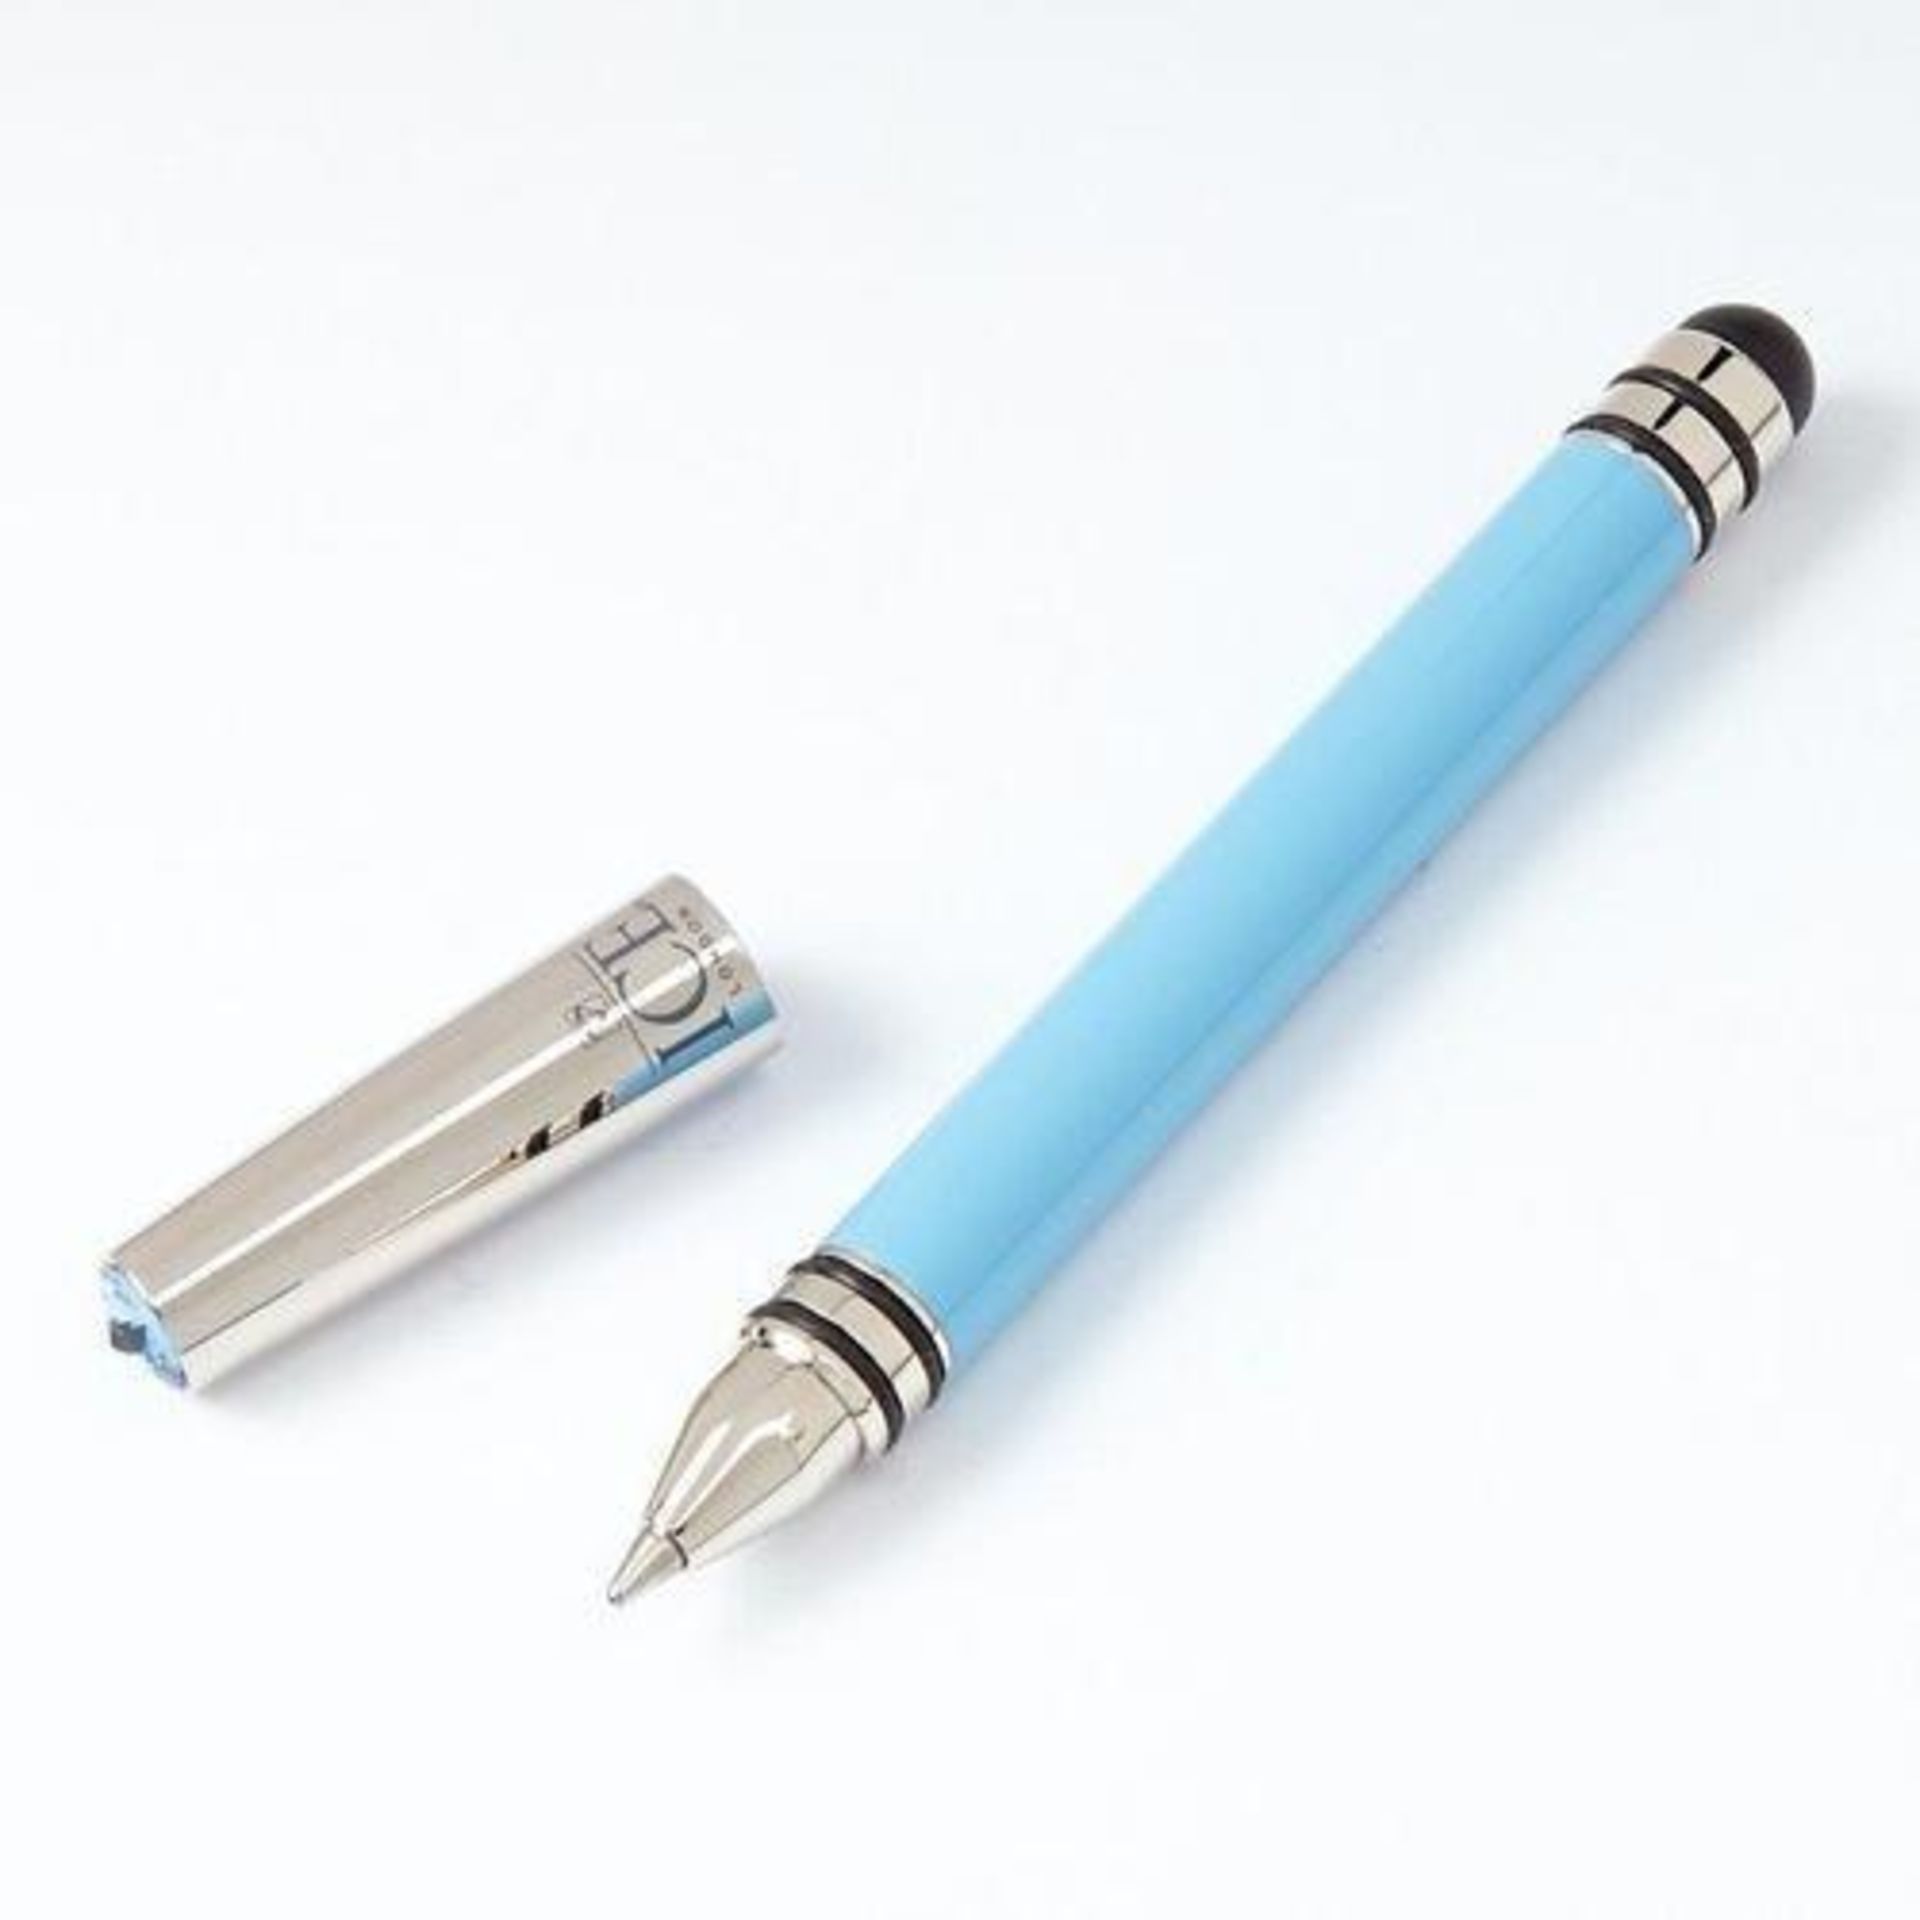 50 x ICE LONDON App Pen Duo - Touch Stylus And Ink Pen Combined - Colour: LIGHT BLUE - MADE WITH - Image 2 of 5